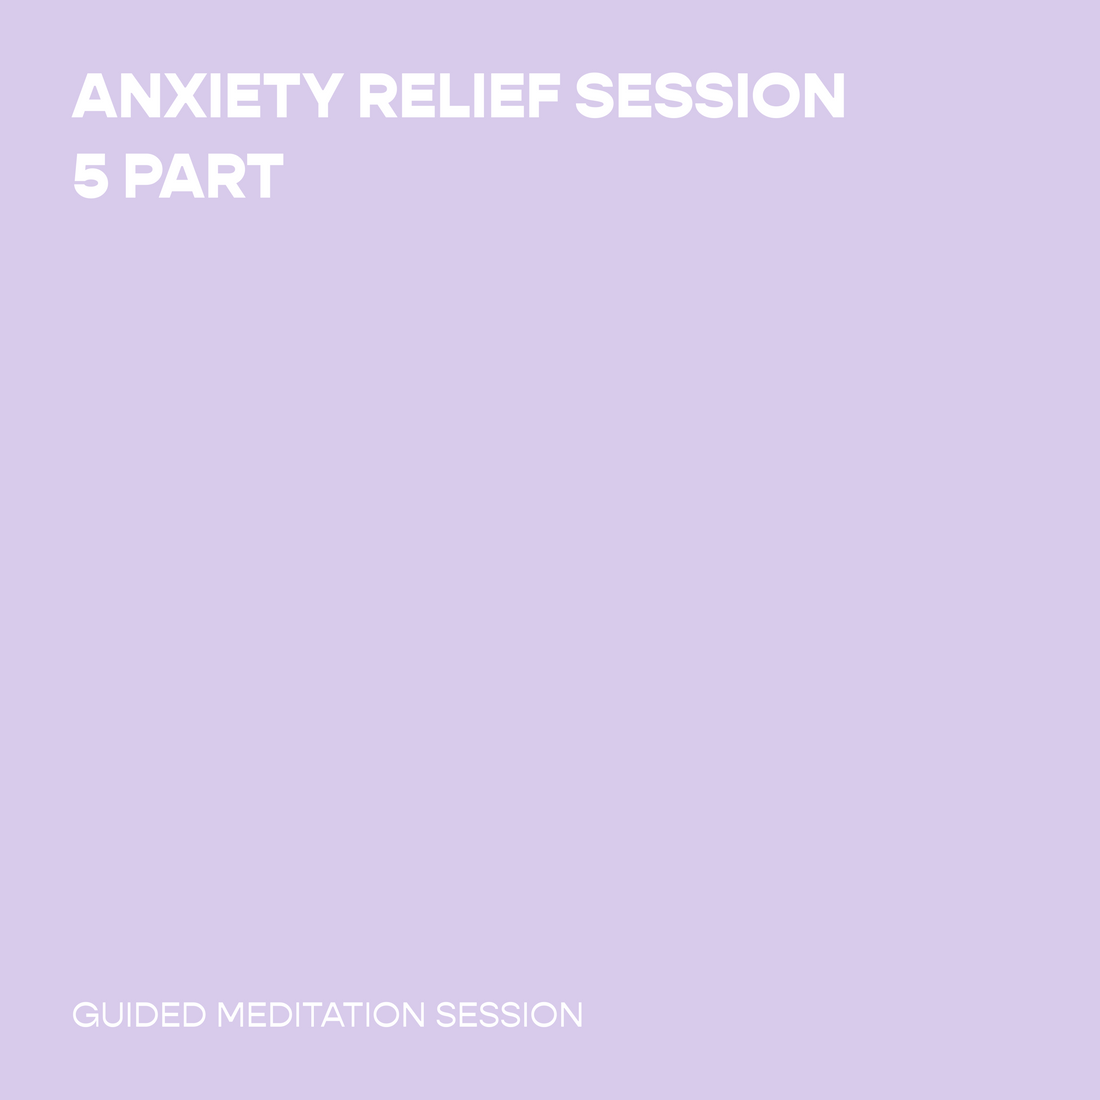 Anxiety Relief Session - 5 Part